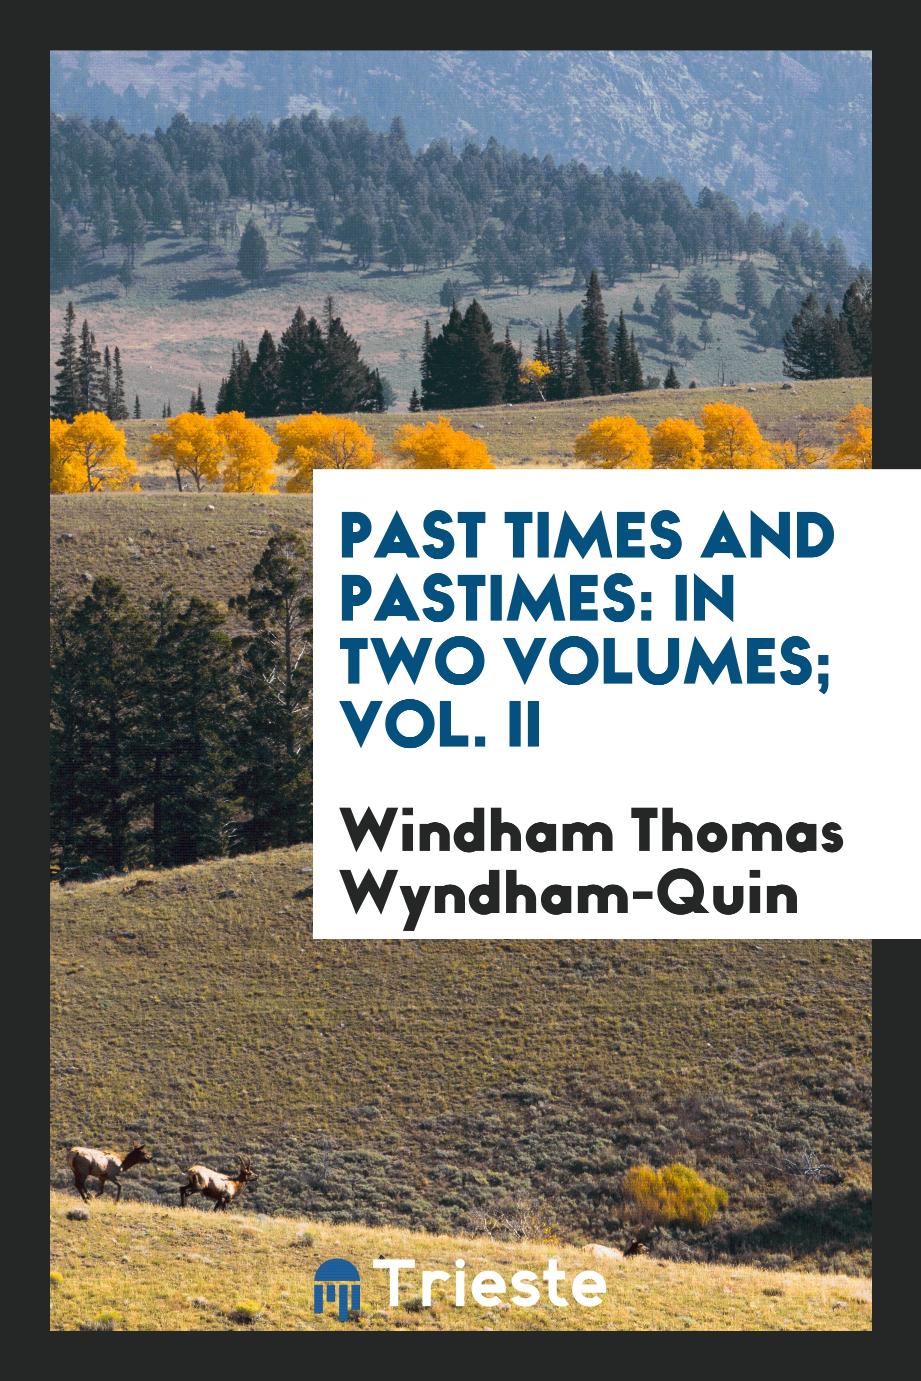 Past Times and Pastimes: in two volumes; Vol. II